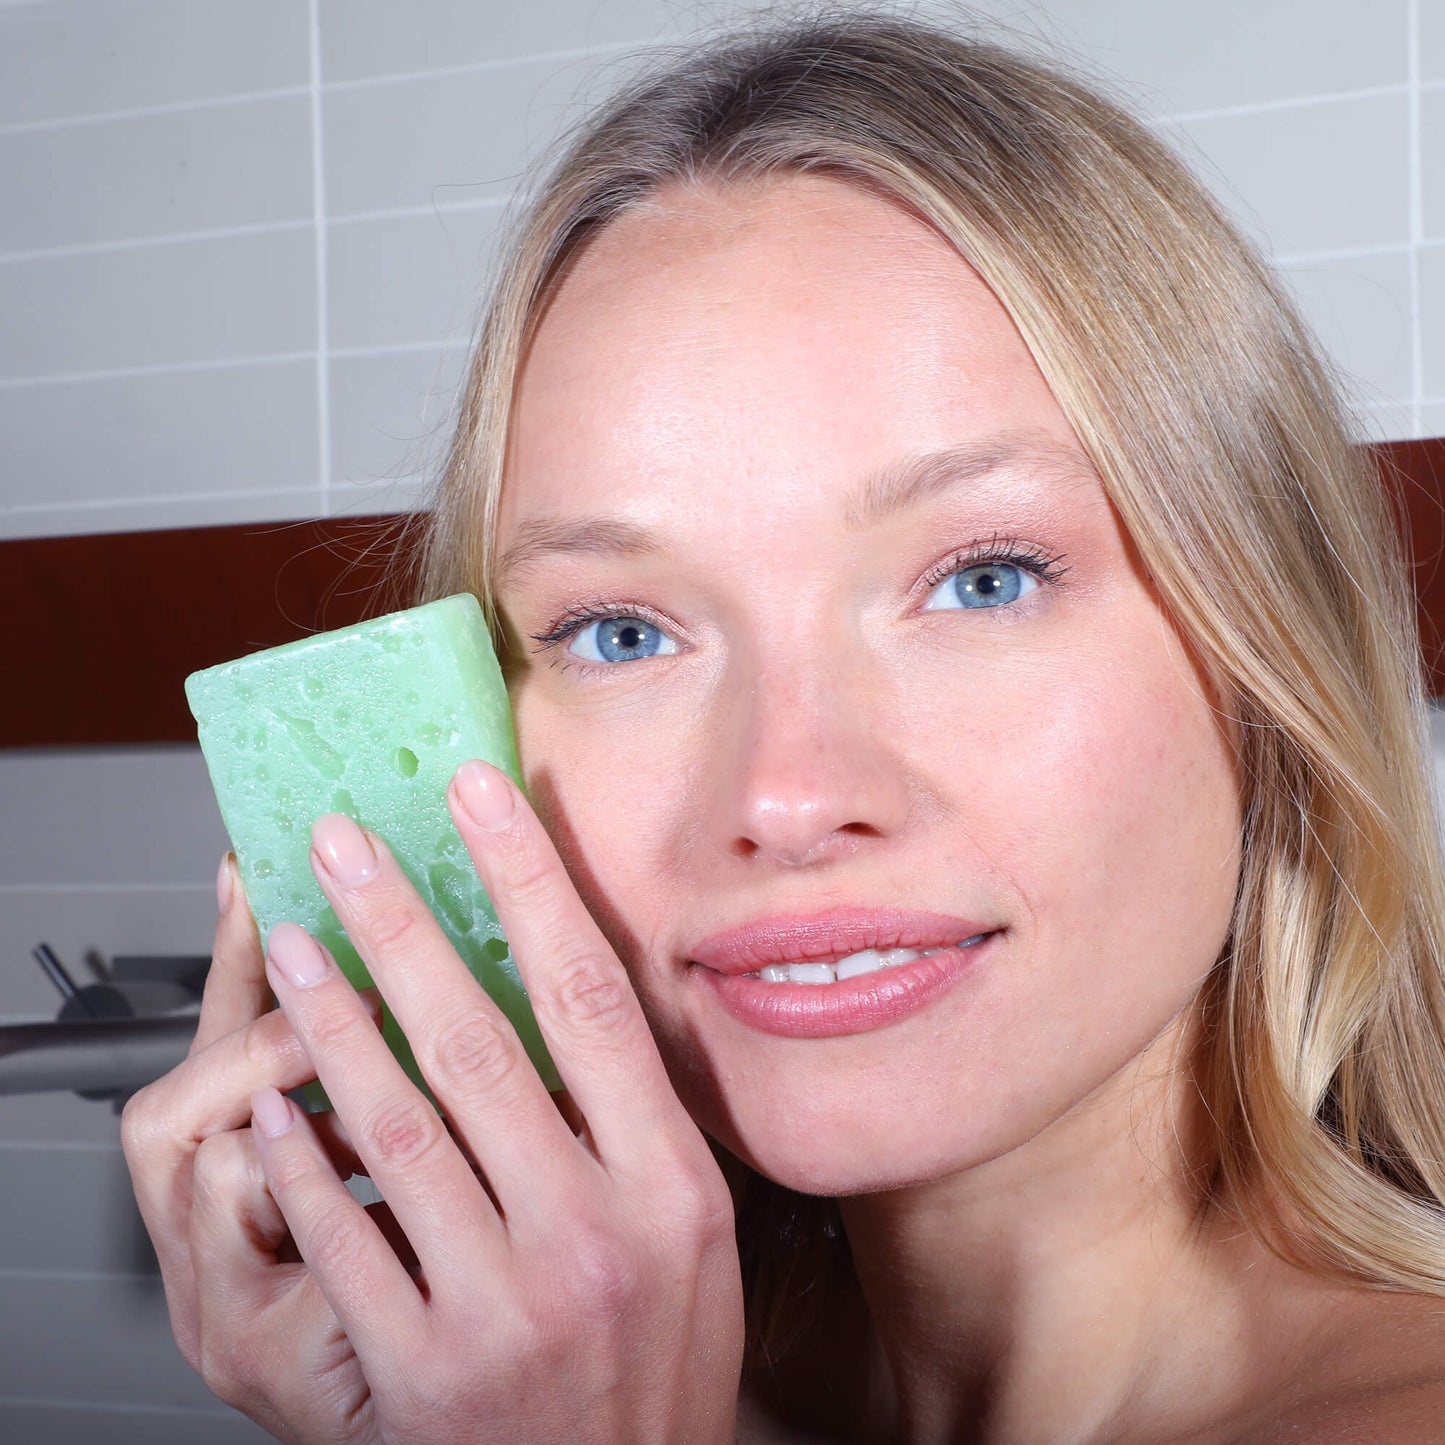 Aloe Soap Sponge - Afterspa -  Spa experience at home